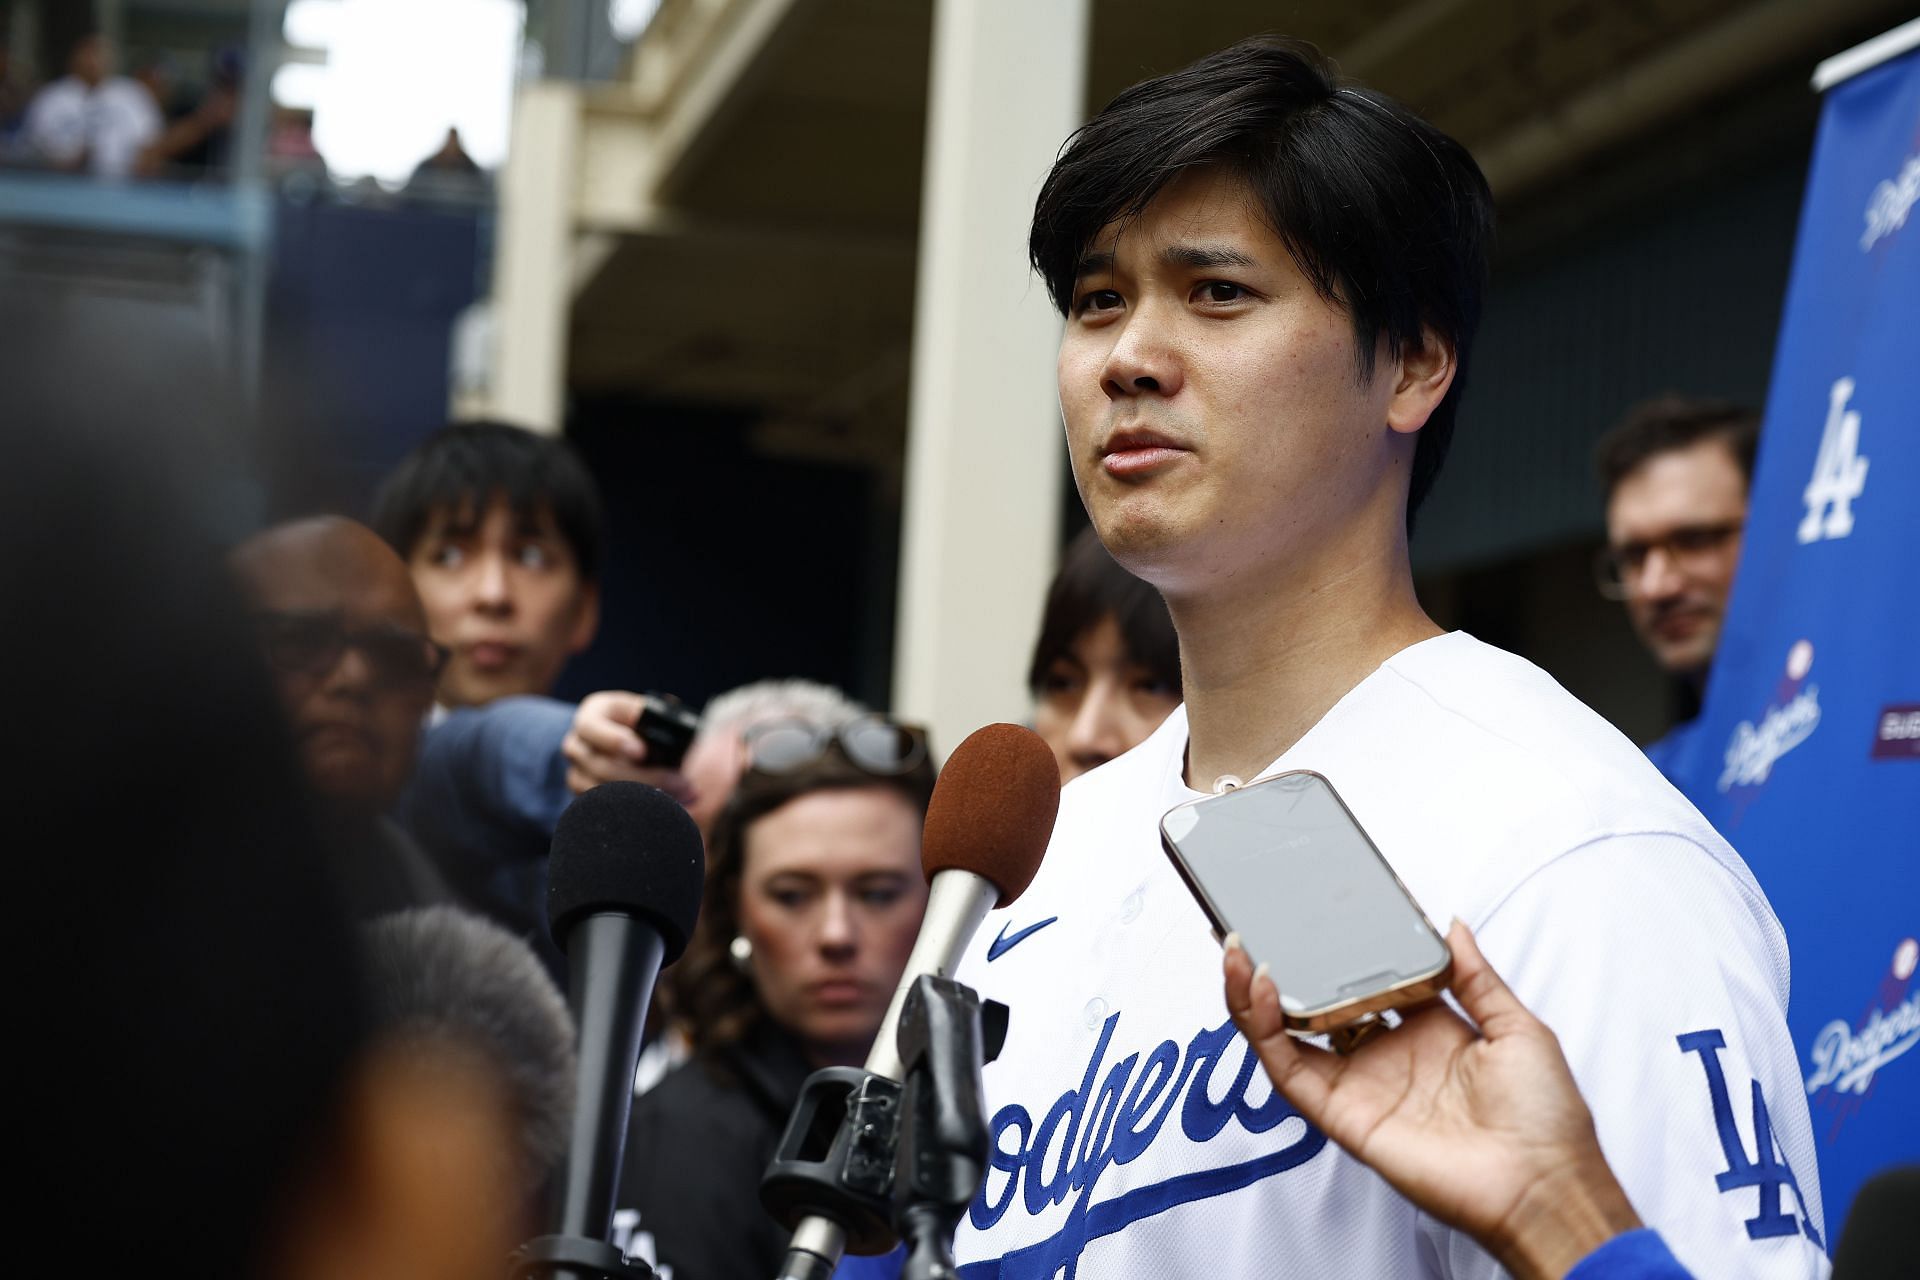 Shohei Ohtani was hitting again with the Dodgers.